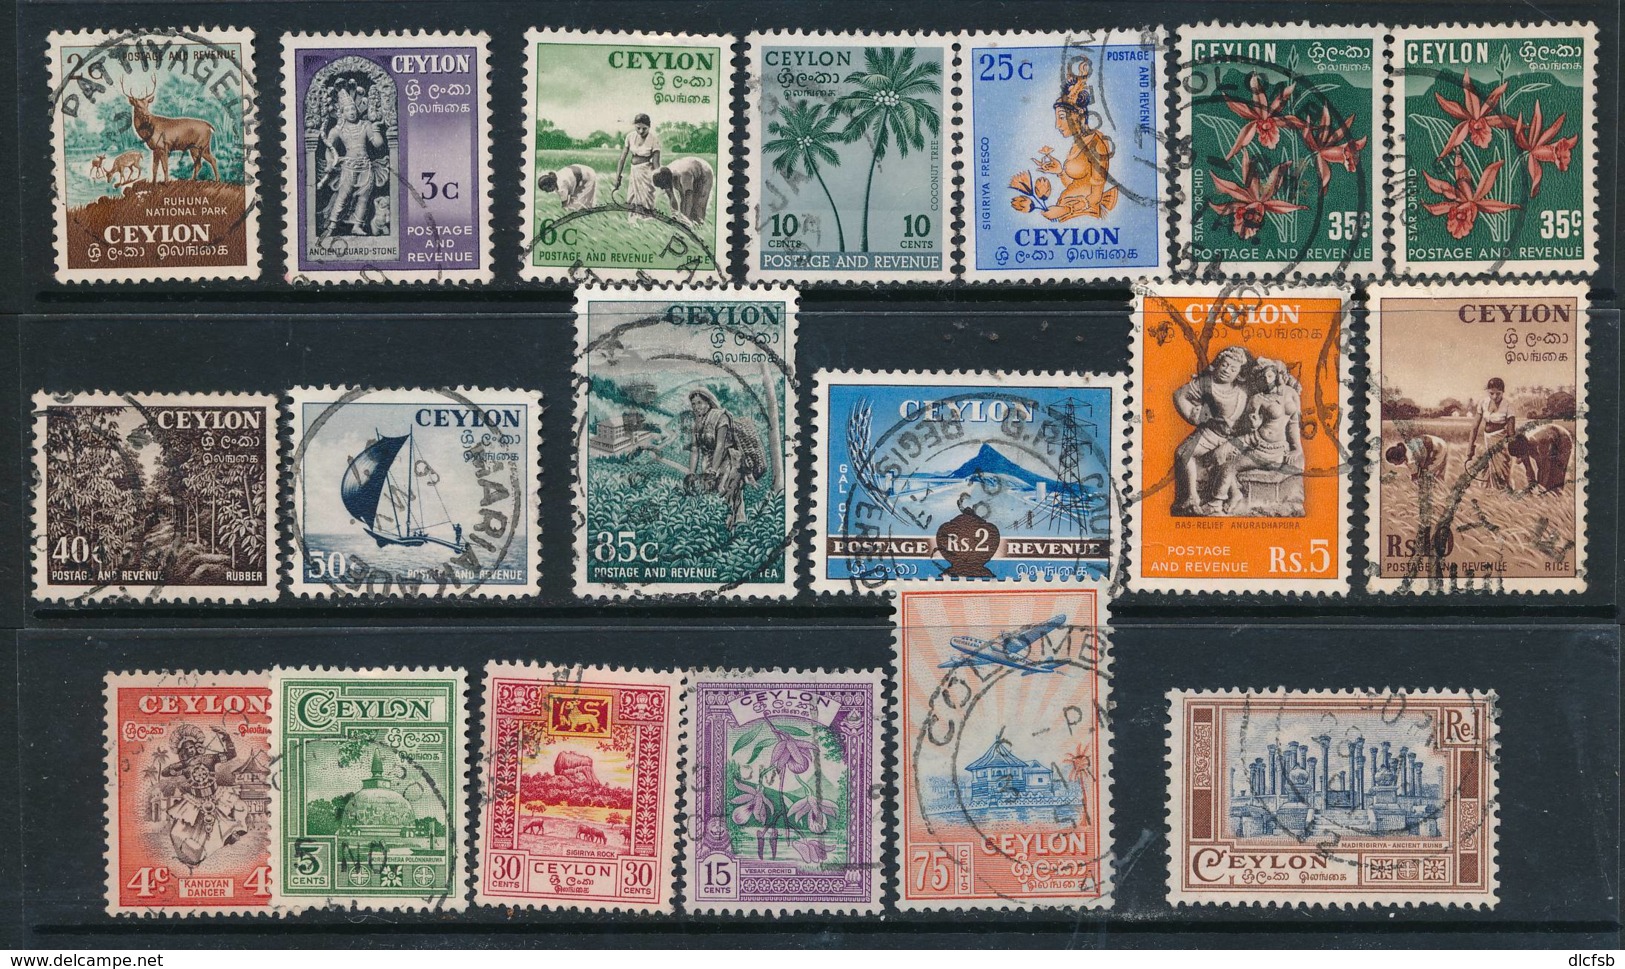 CEYLON, 1950 And 1951 Sets Complete To 10Rupees Fine Used, Cat £37 - Ceylon (...-1947)